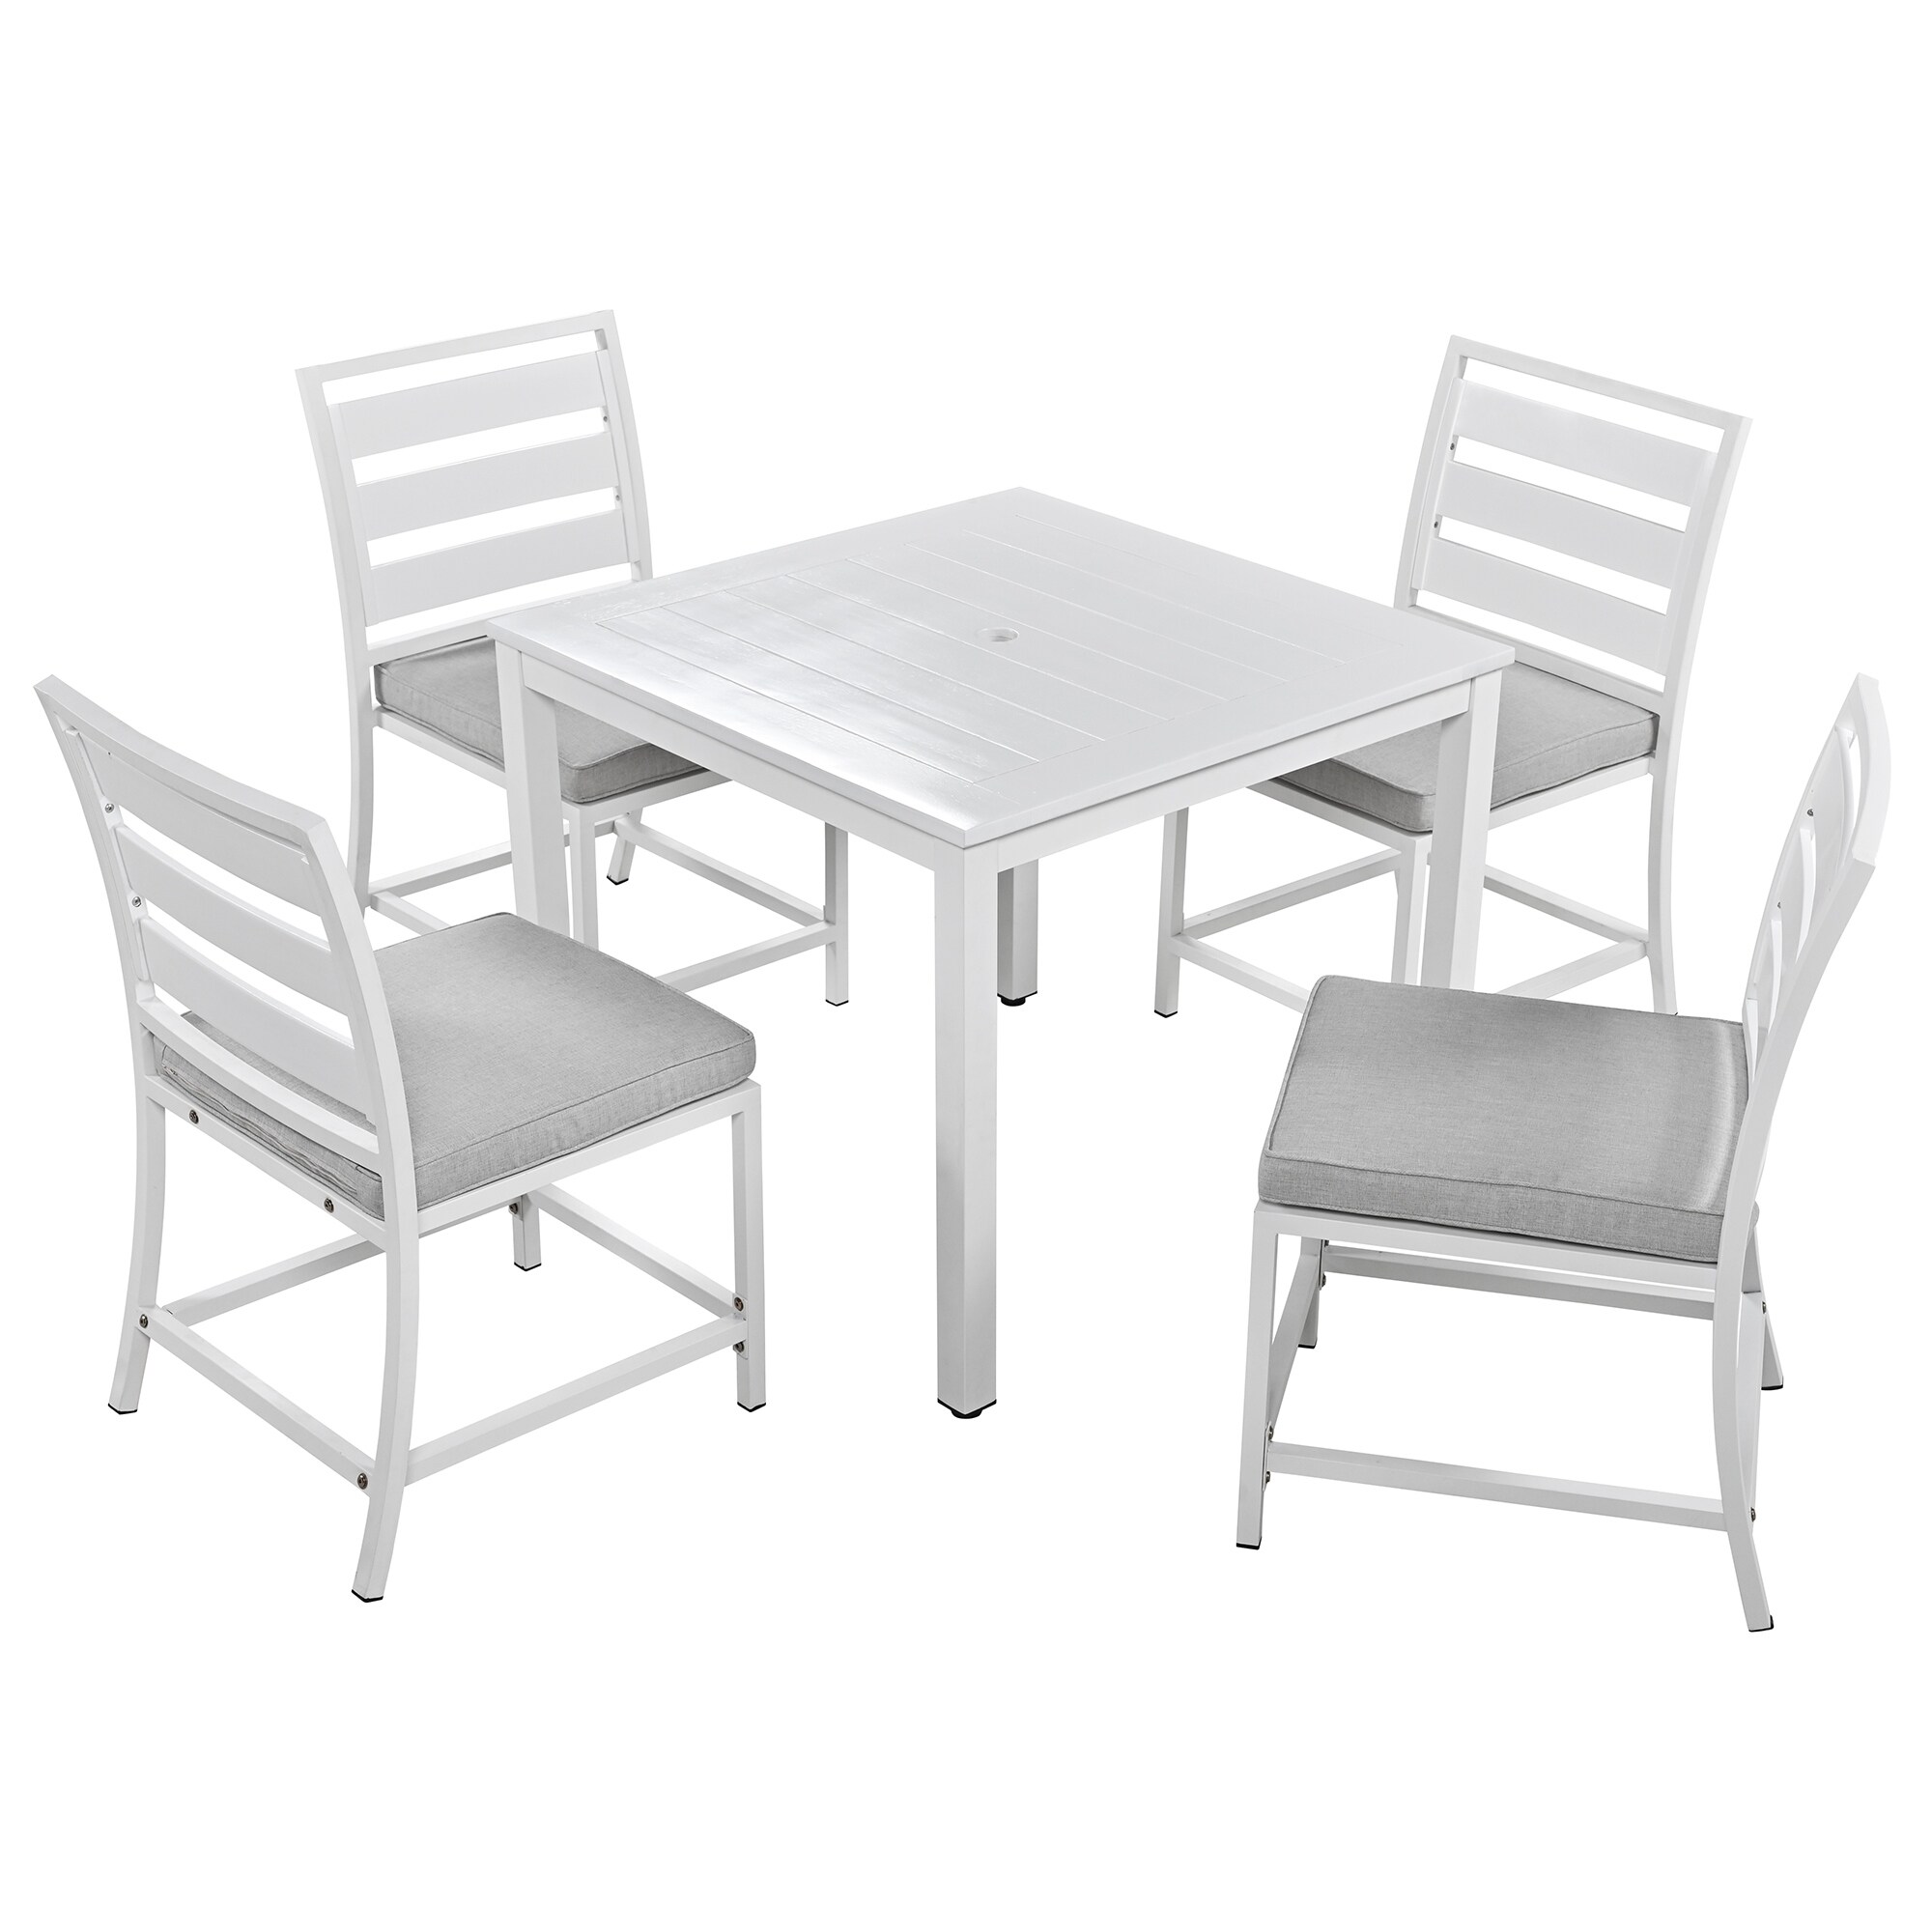 Outdoor Steel And Acacia Wood Four-person Dining Table And Chairs Are Suitable For Courtyards  Balconies  Lawns